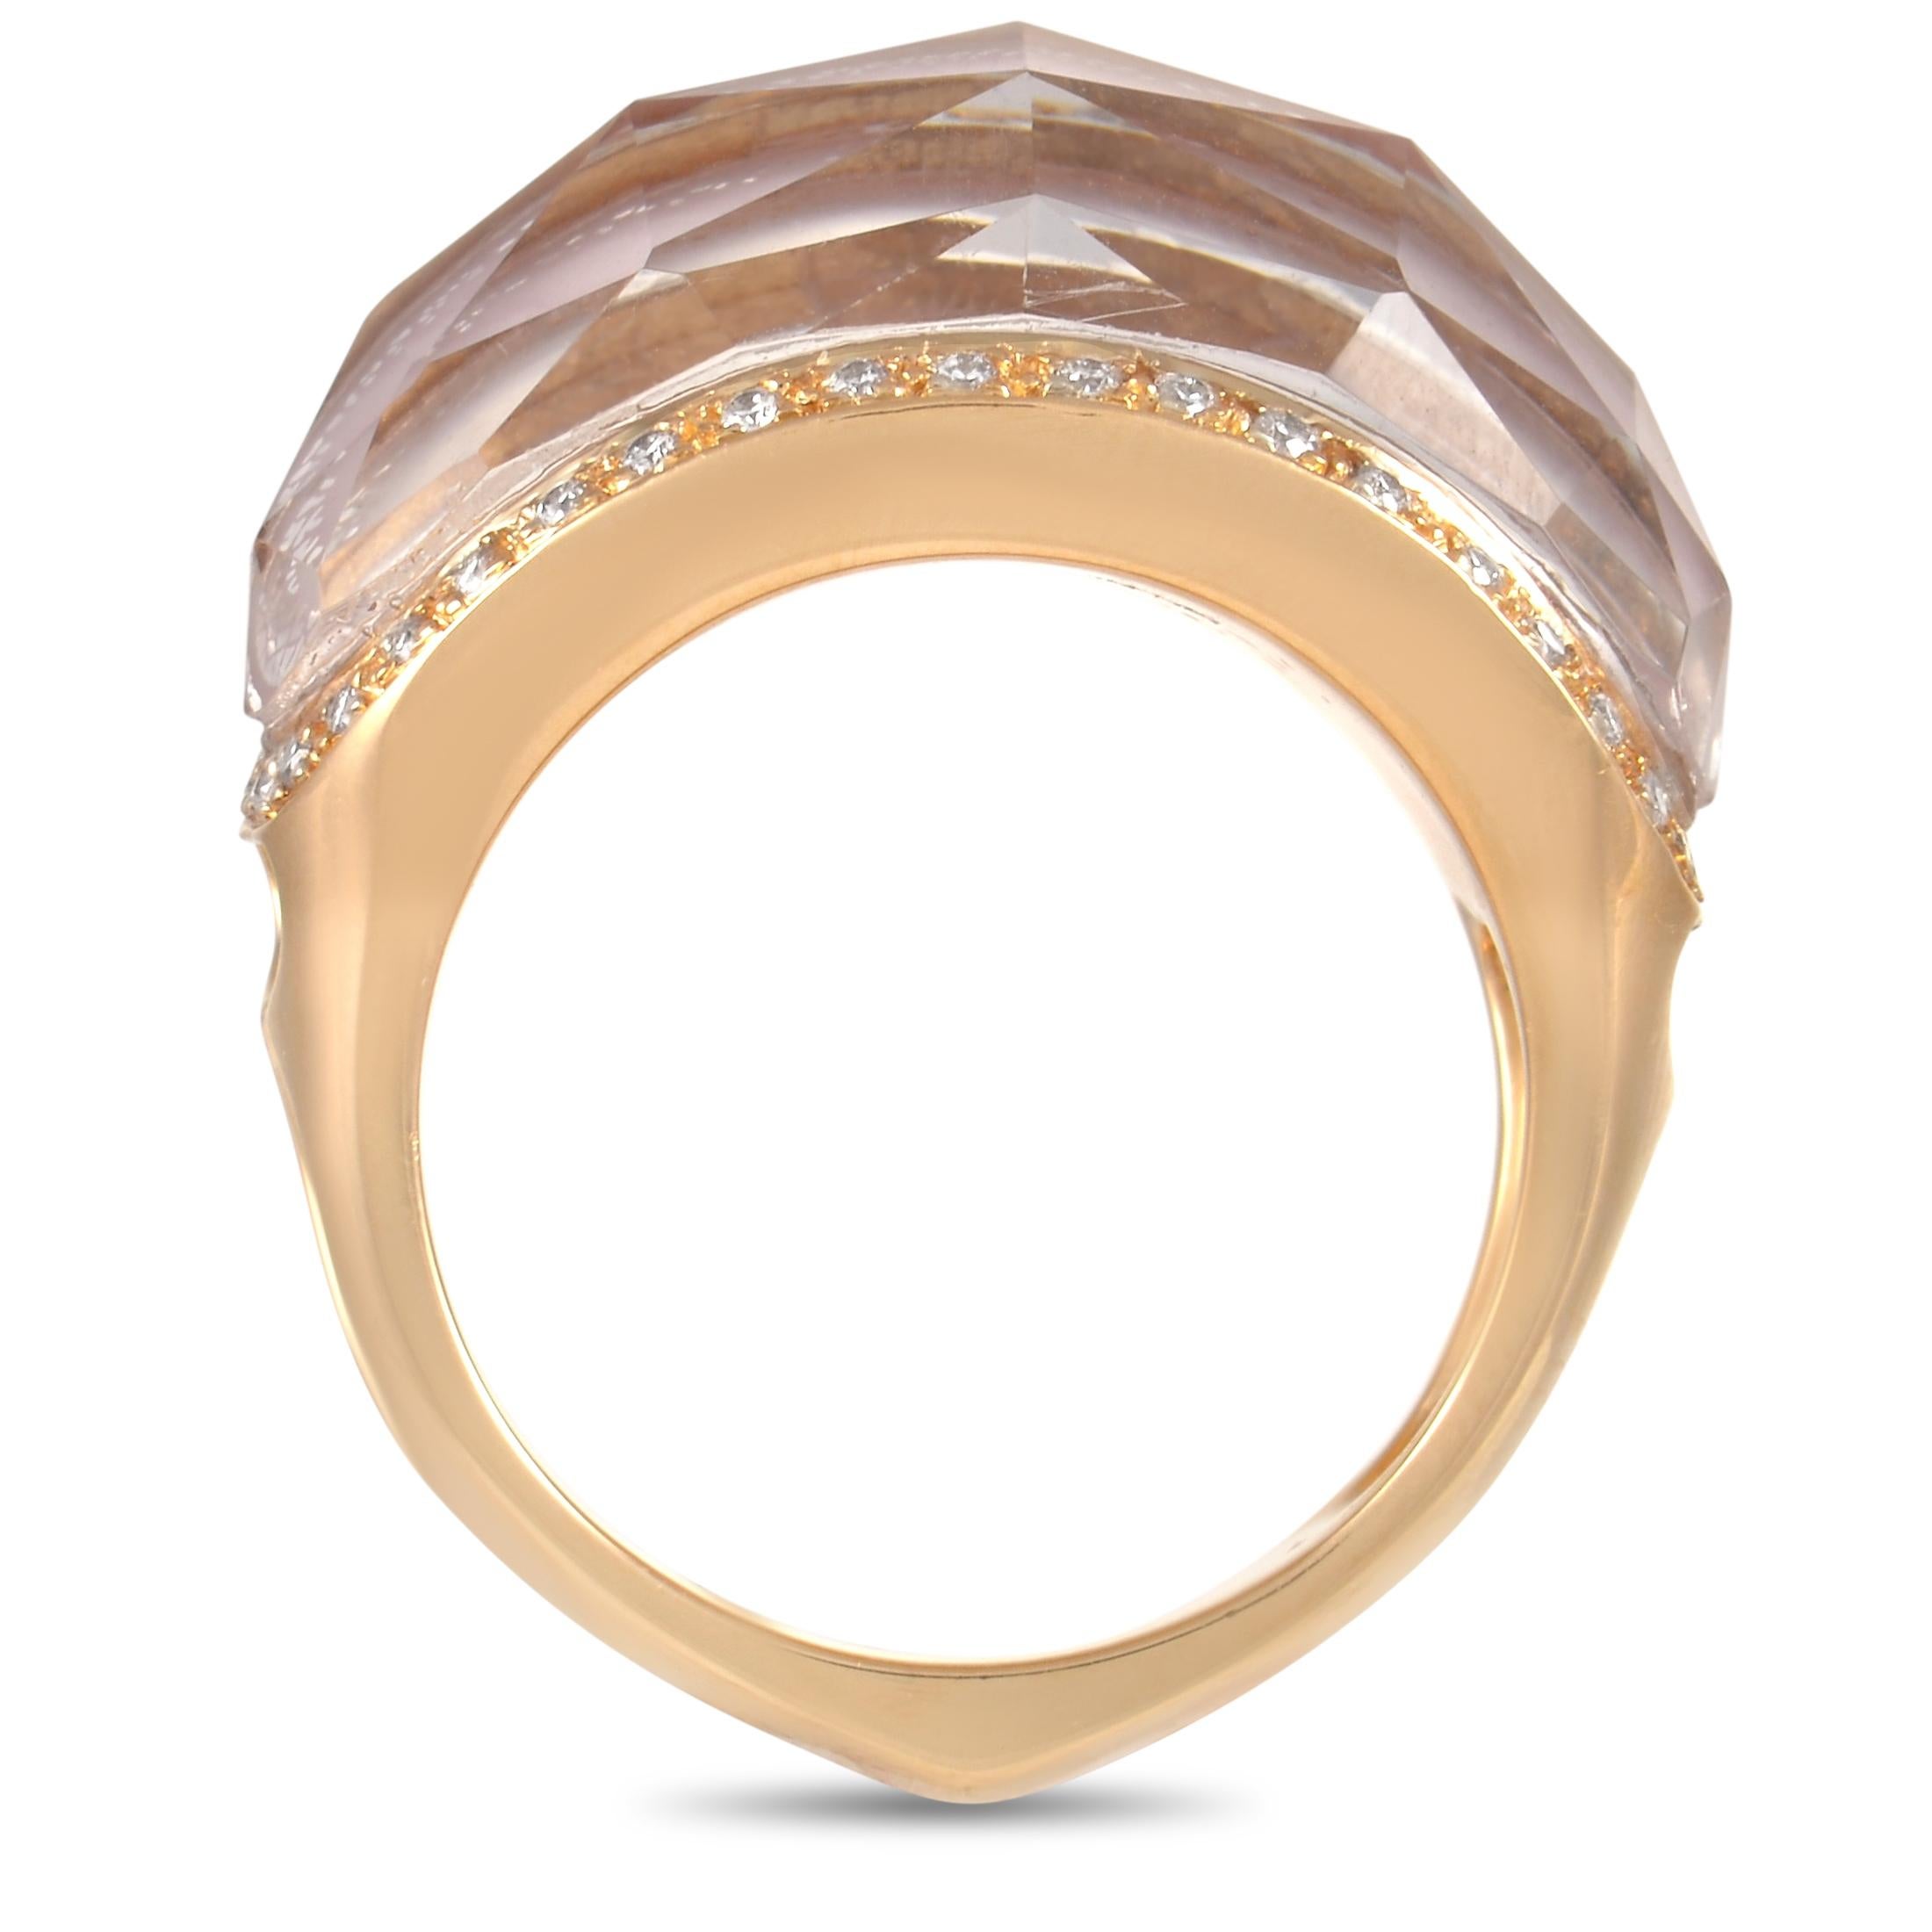 This luxury piece from Stephen Webster is decidedly on-trend. At the center of this piece’s 18K Yellow Gold setting, you’ll find a bold Crystal Haze Kunzite gemstone with a captivating pink hue. Diamonds totaling 0.50 carats add extra elegance to